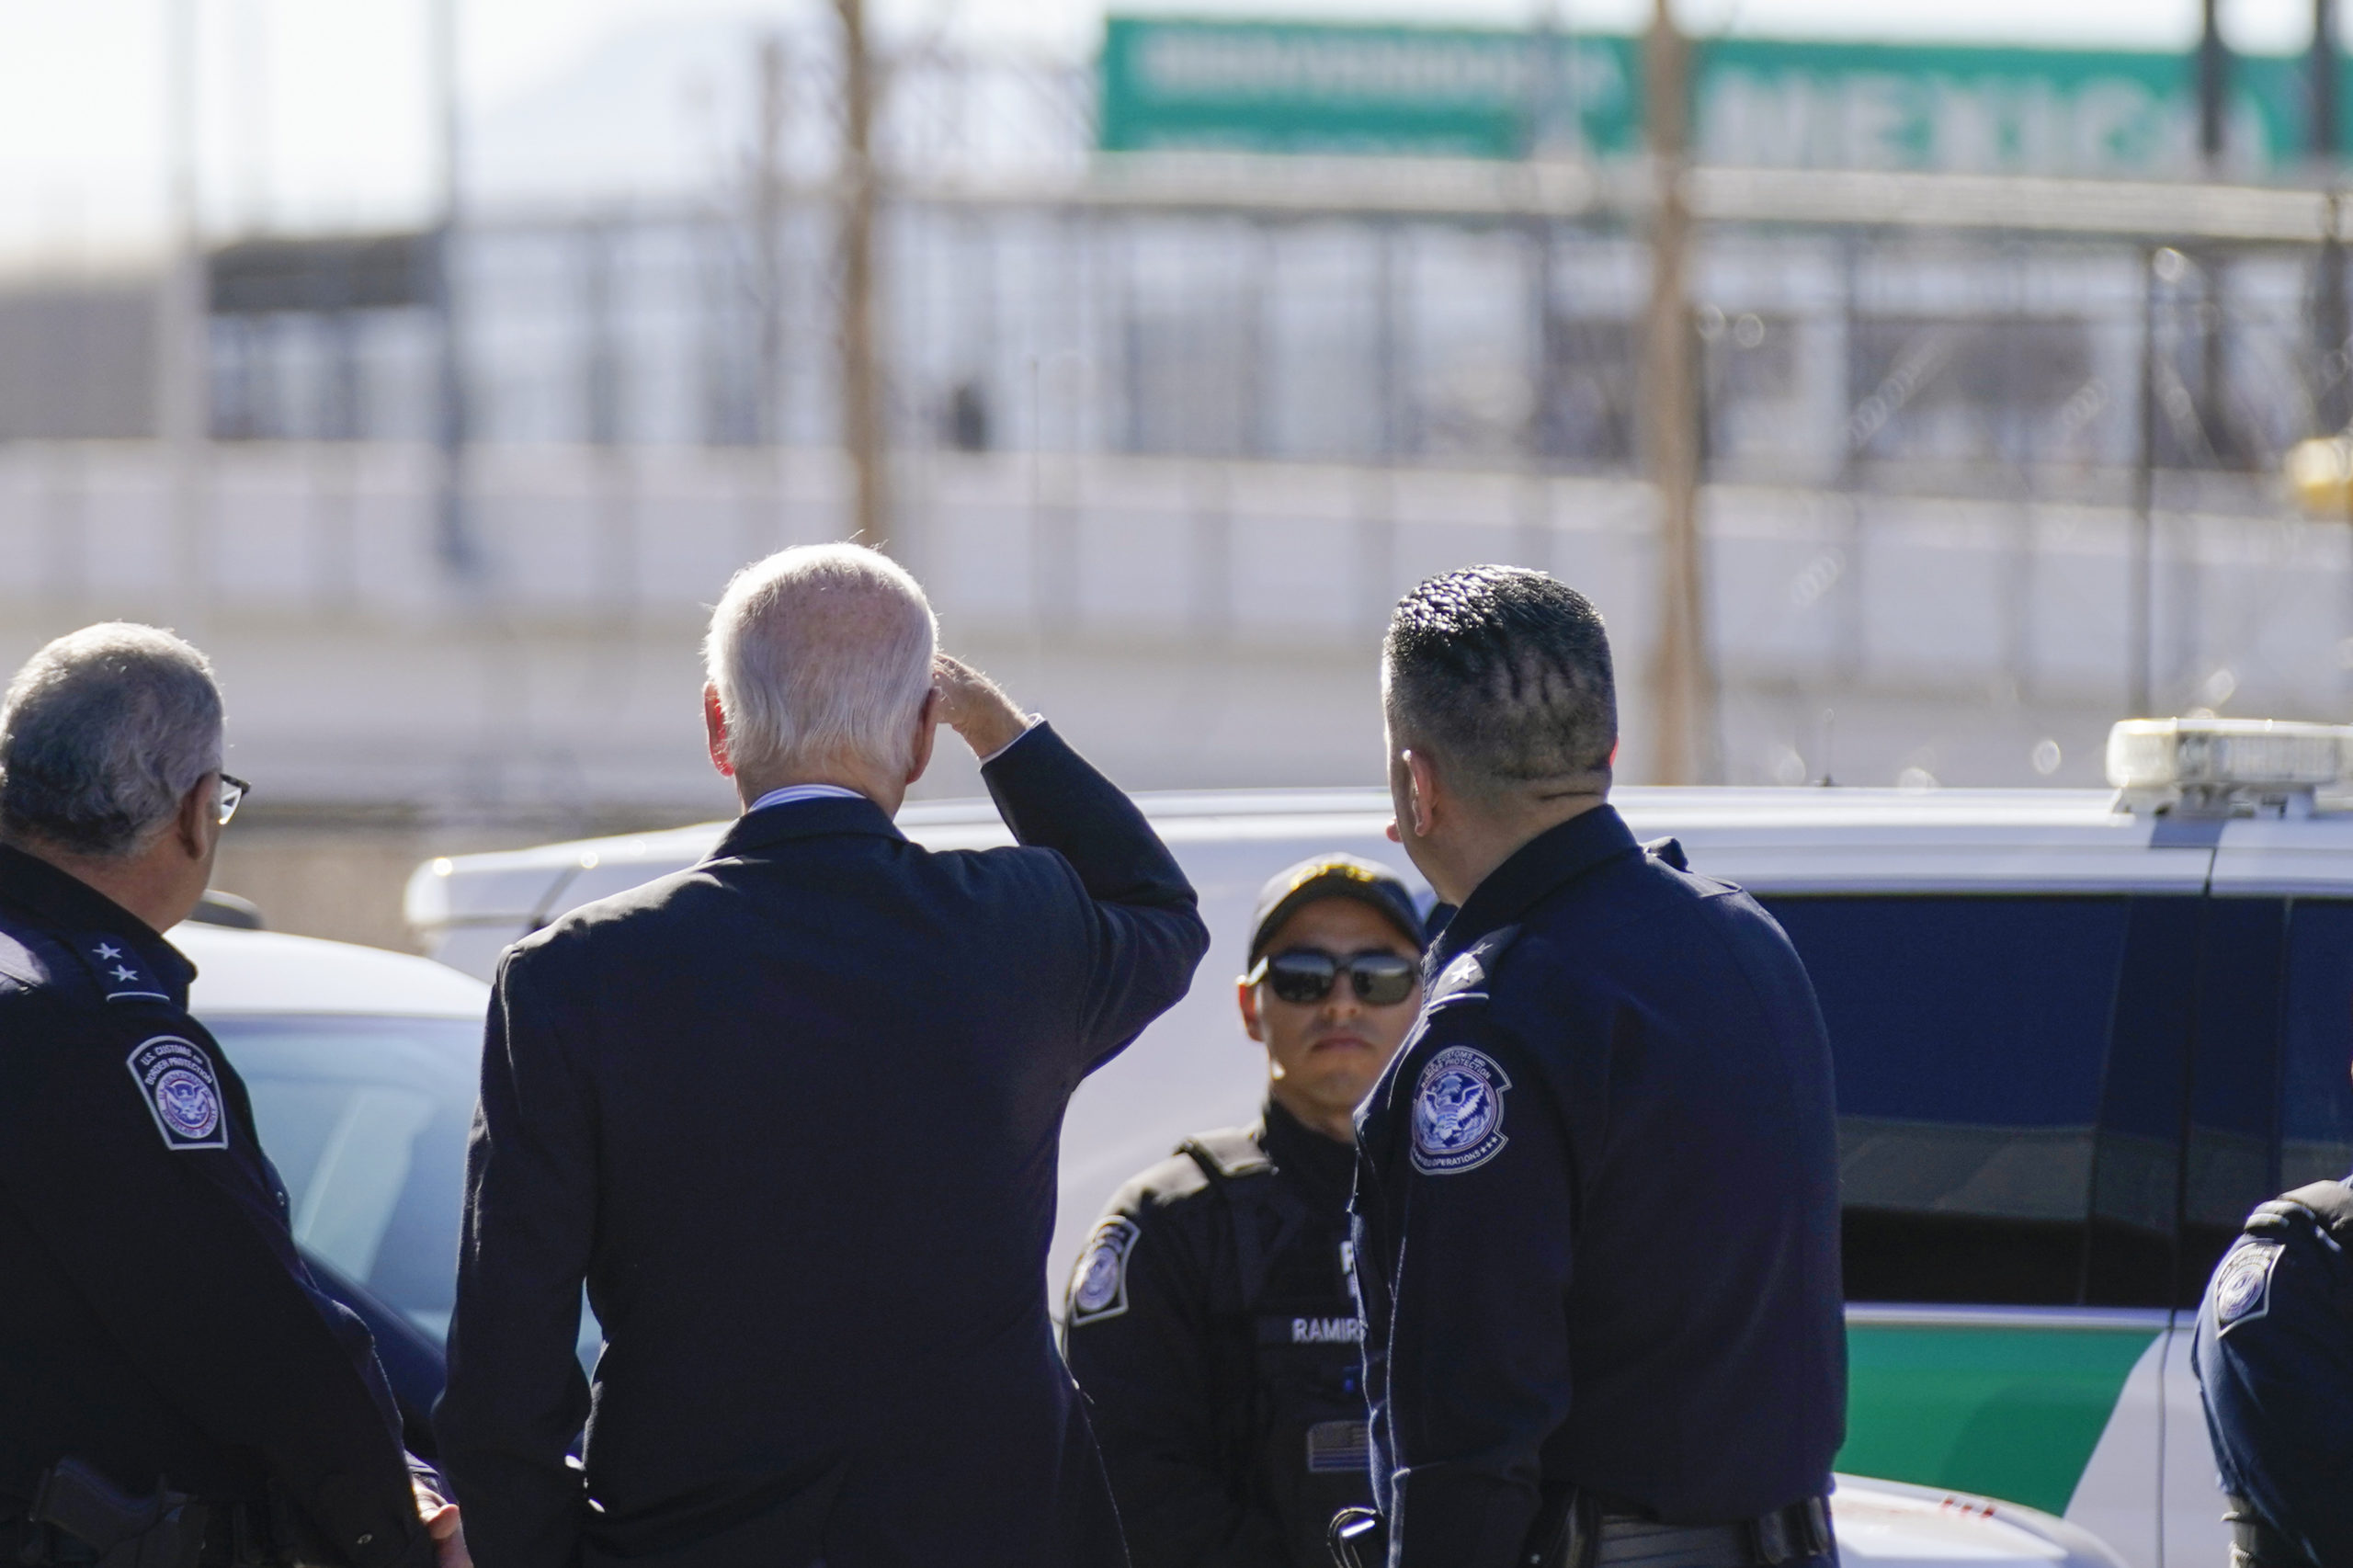 President Joe Biden, second from left, looks towards a large “Welcome to Mexico” sign that is hung over the Bridge of the Americas as he tours the El Paso, Texas, port of entry on Jan. 8.